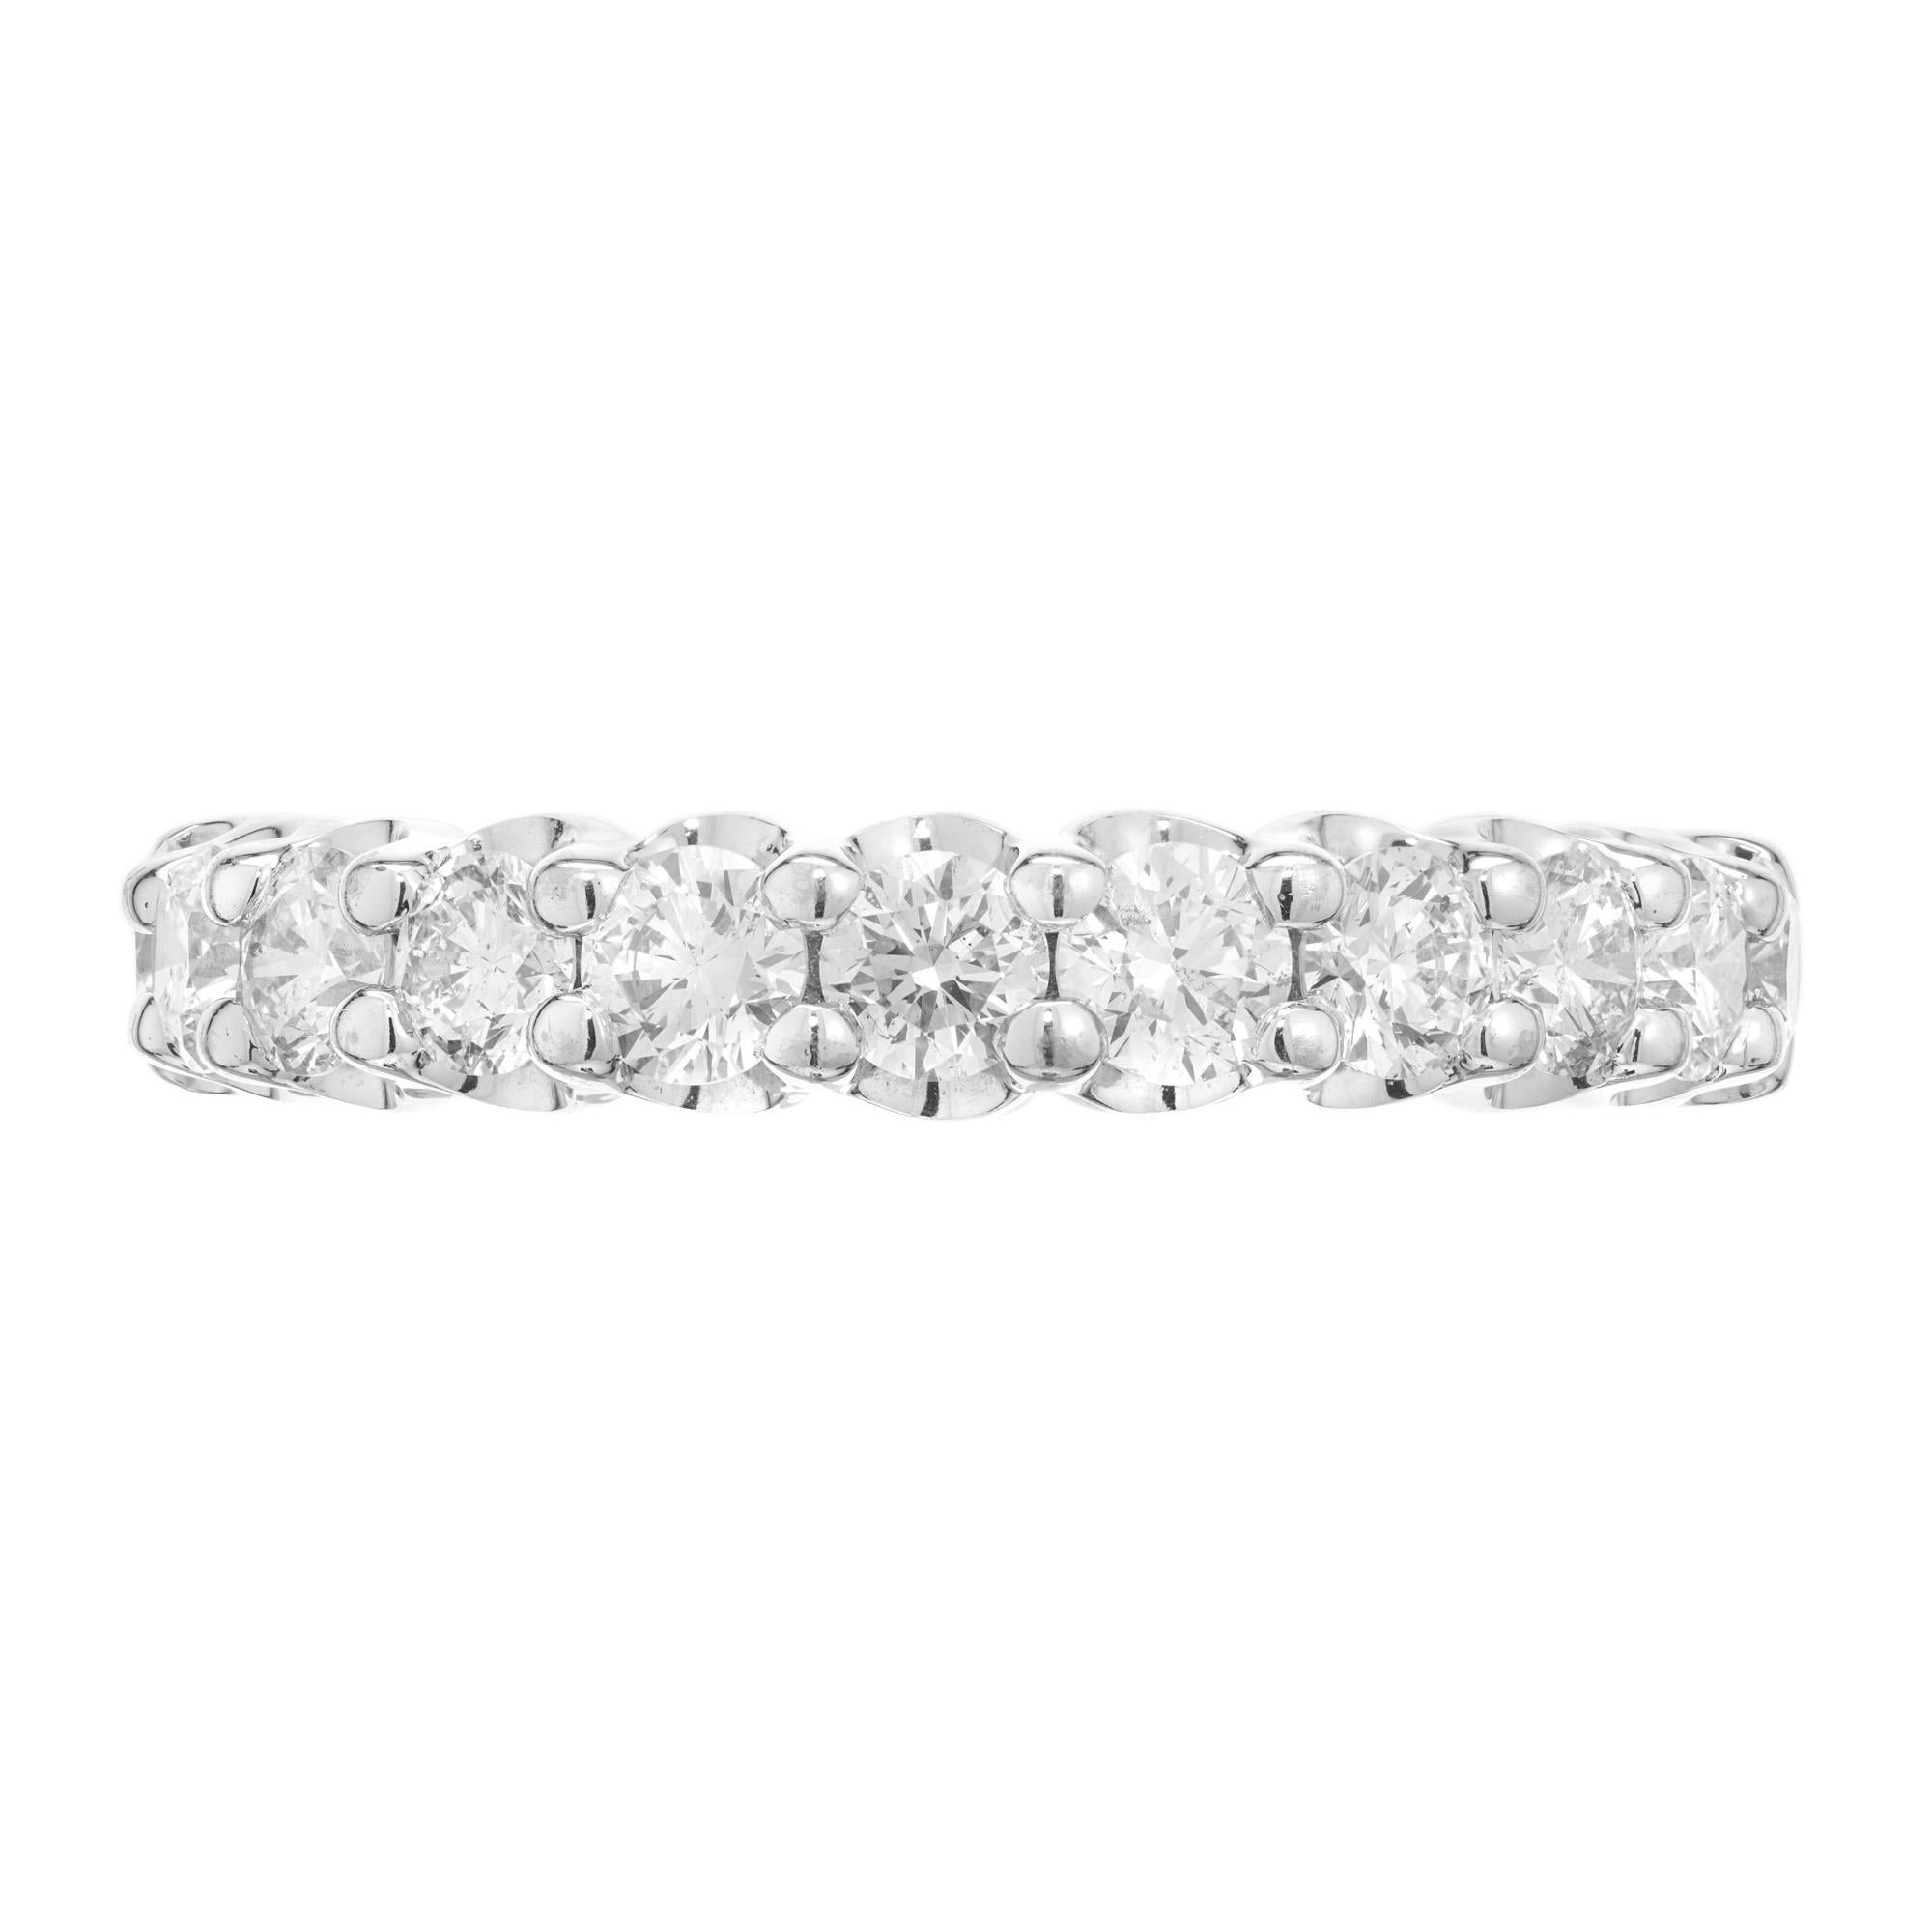 Diamond wedding band ring. Simple common prong style half way around wedding band set with bright 11 round brilliant cut white diamonds totaling 2.42cts. The ring is a size 8.5 and can be sized up or down one size. 

11 round brilliant cut diamonds,